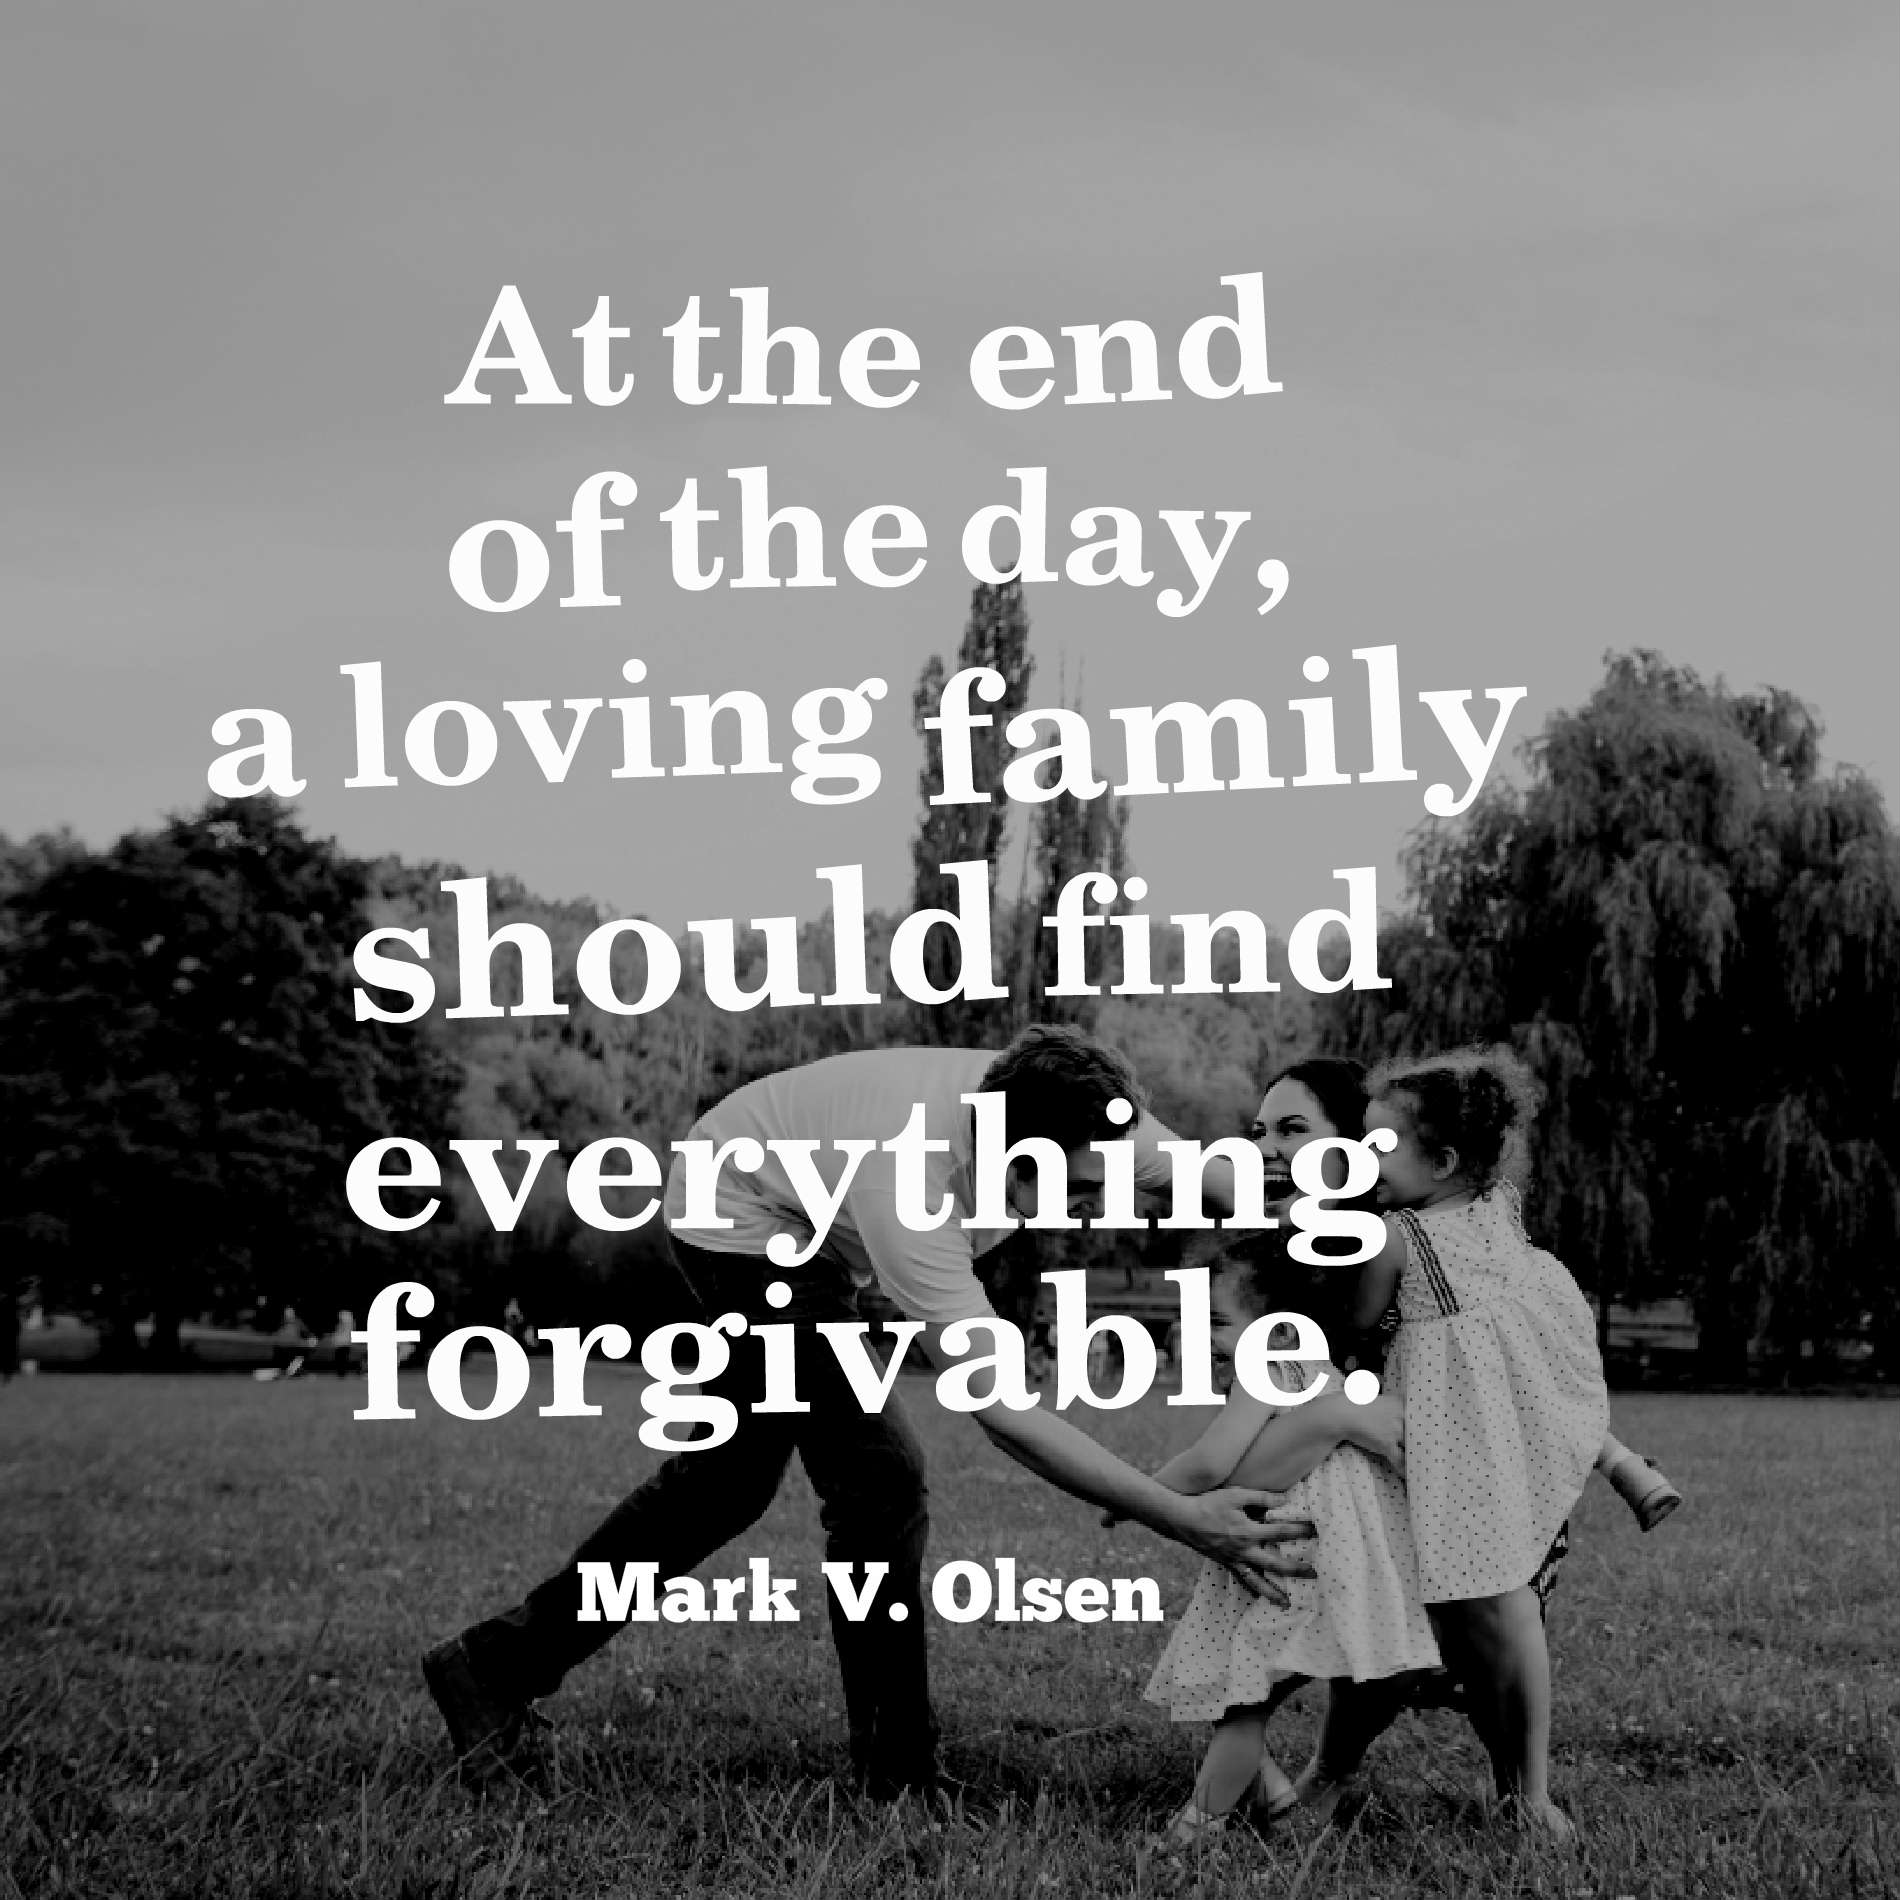 At the end of the day, a loving family should find everything forgivable.